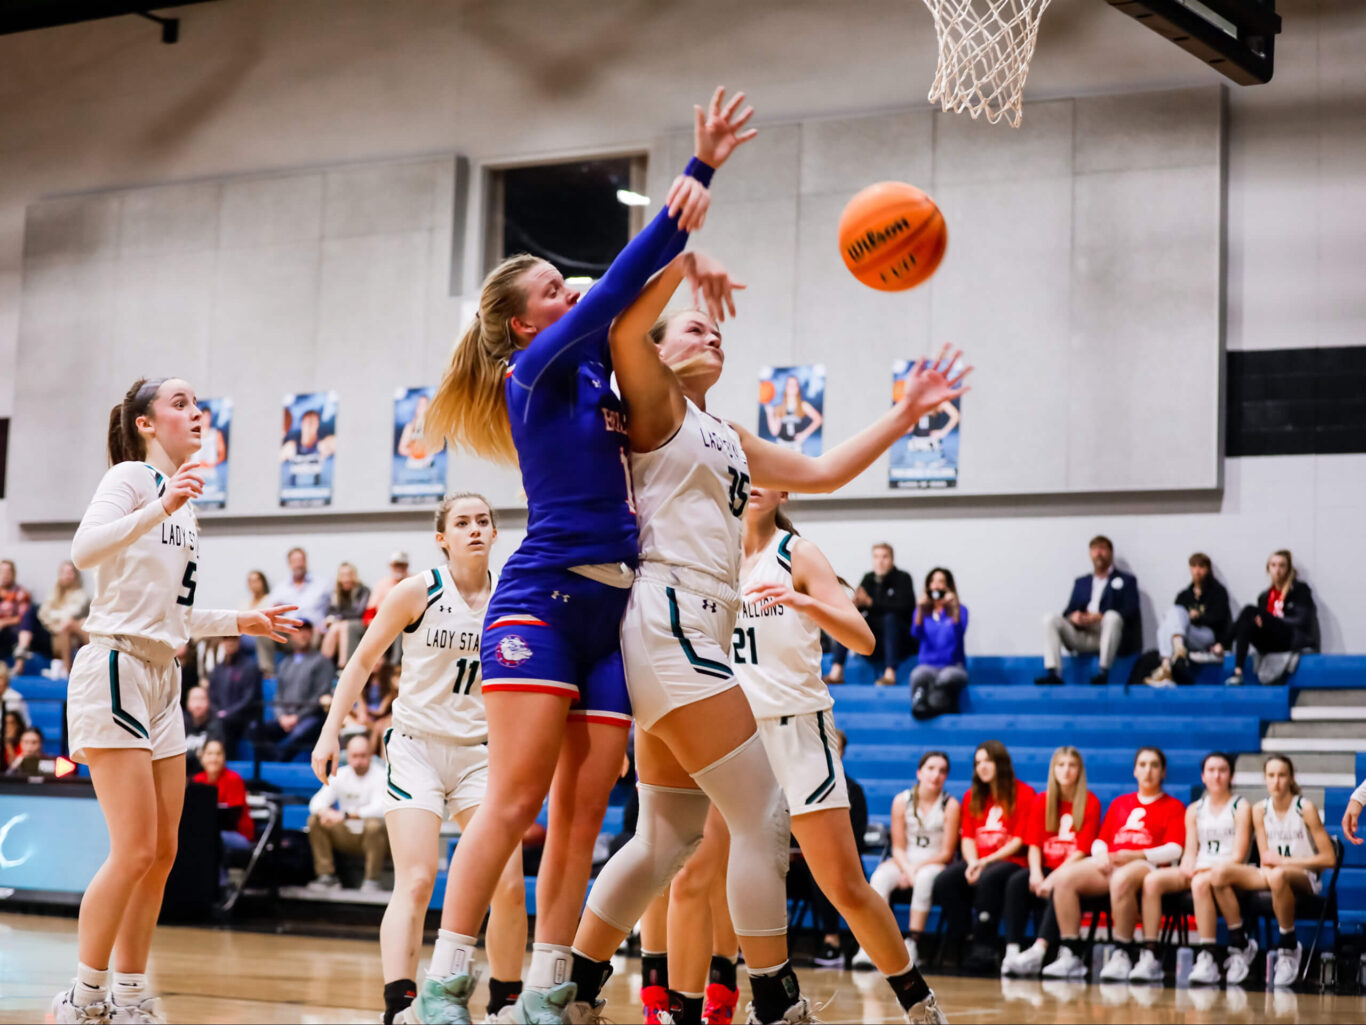 A girl is playing basketball and attempting to block a shot.